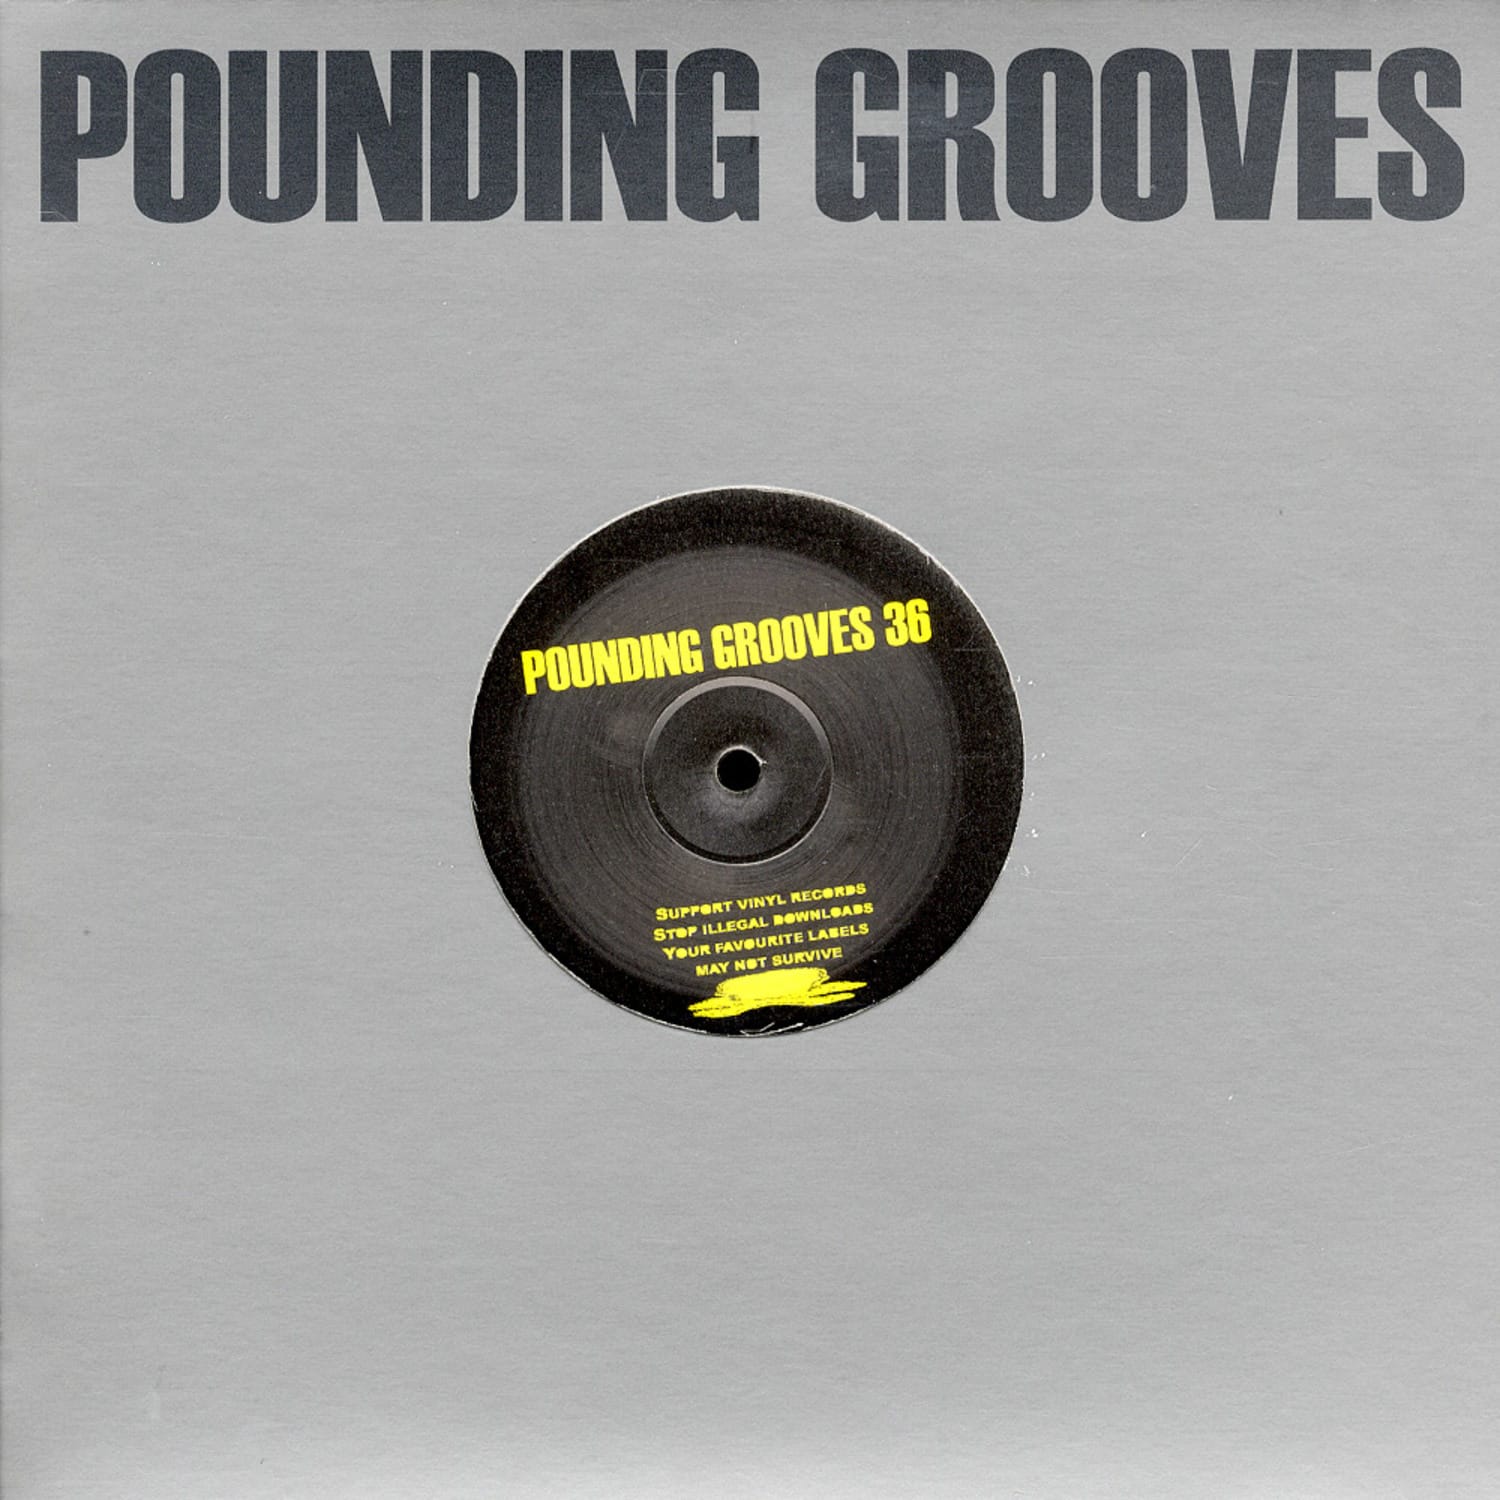 Pounding Grooves - NO 36 